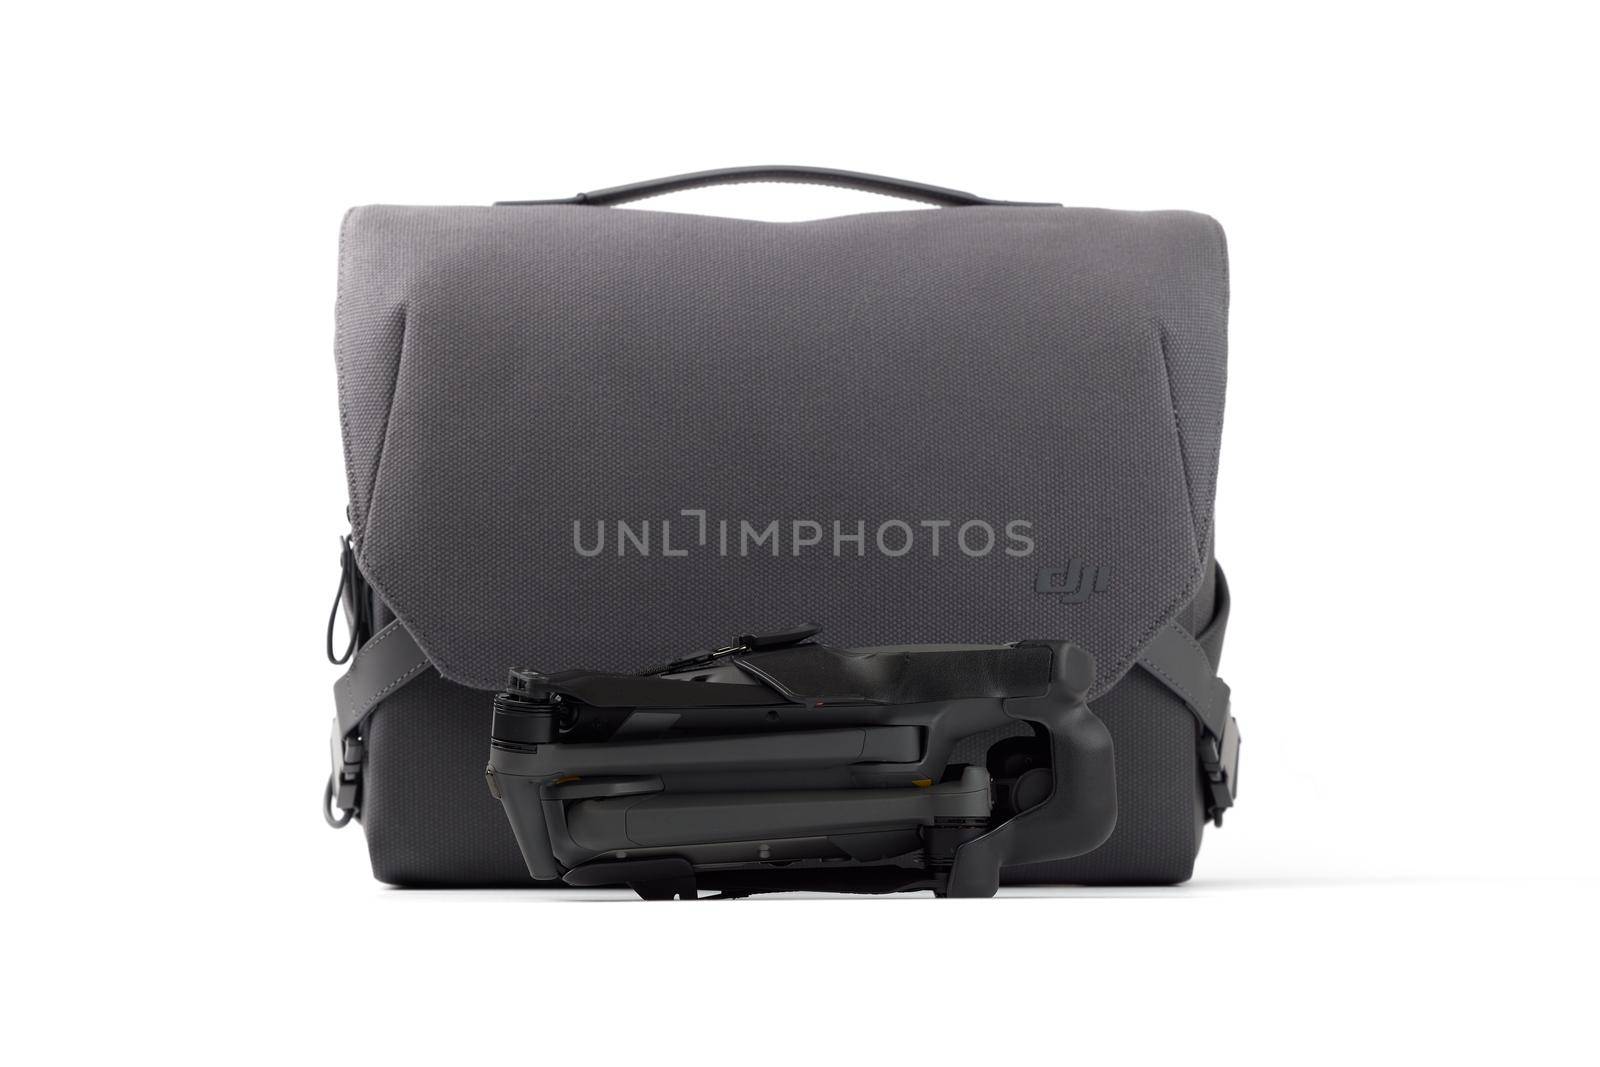 New DJI Mavic 3 Drone bag isolated on white. Accessory for carrying and storing the quadcopter. DJI world leader developer and manufacturers in UA. 17.12.2021, Rostov region, Russia by EvgeniyQW